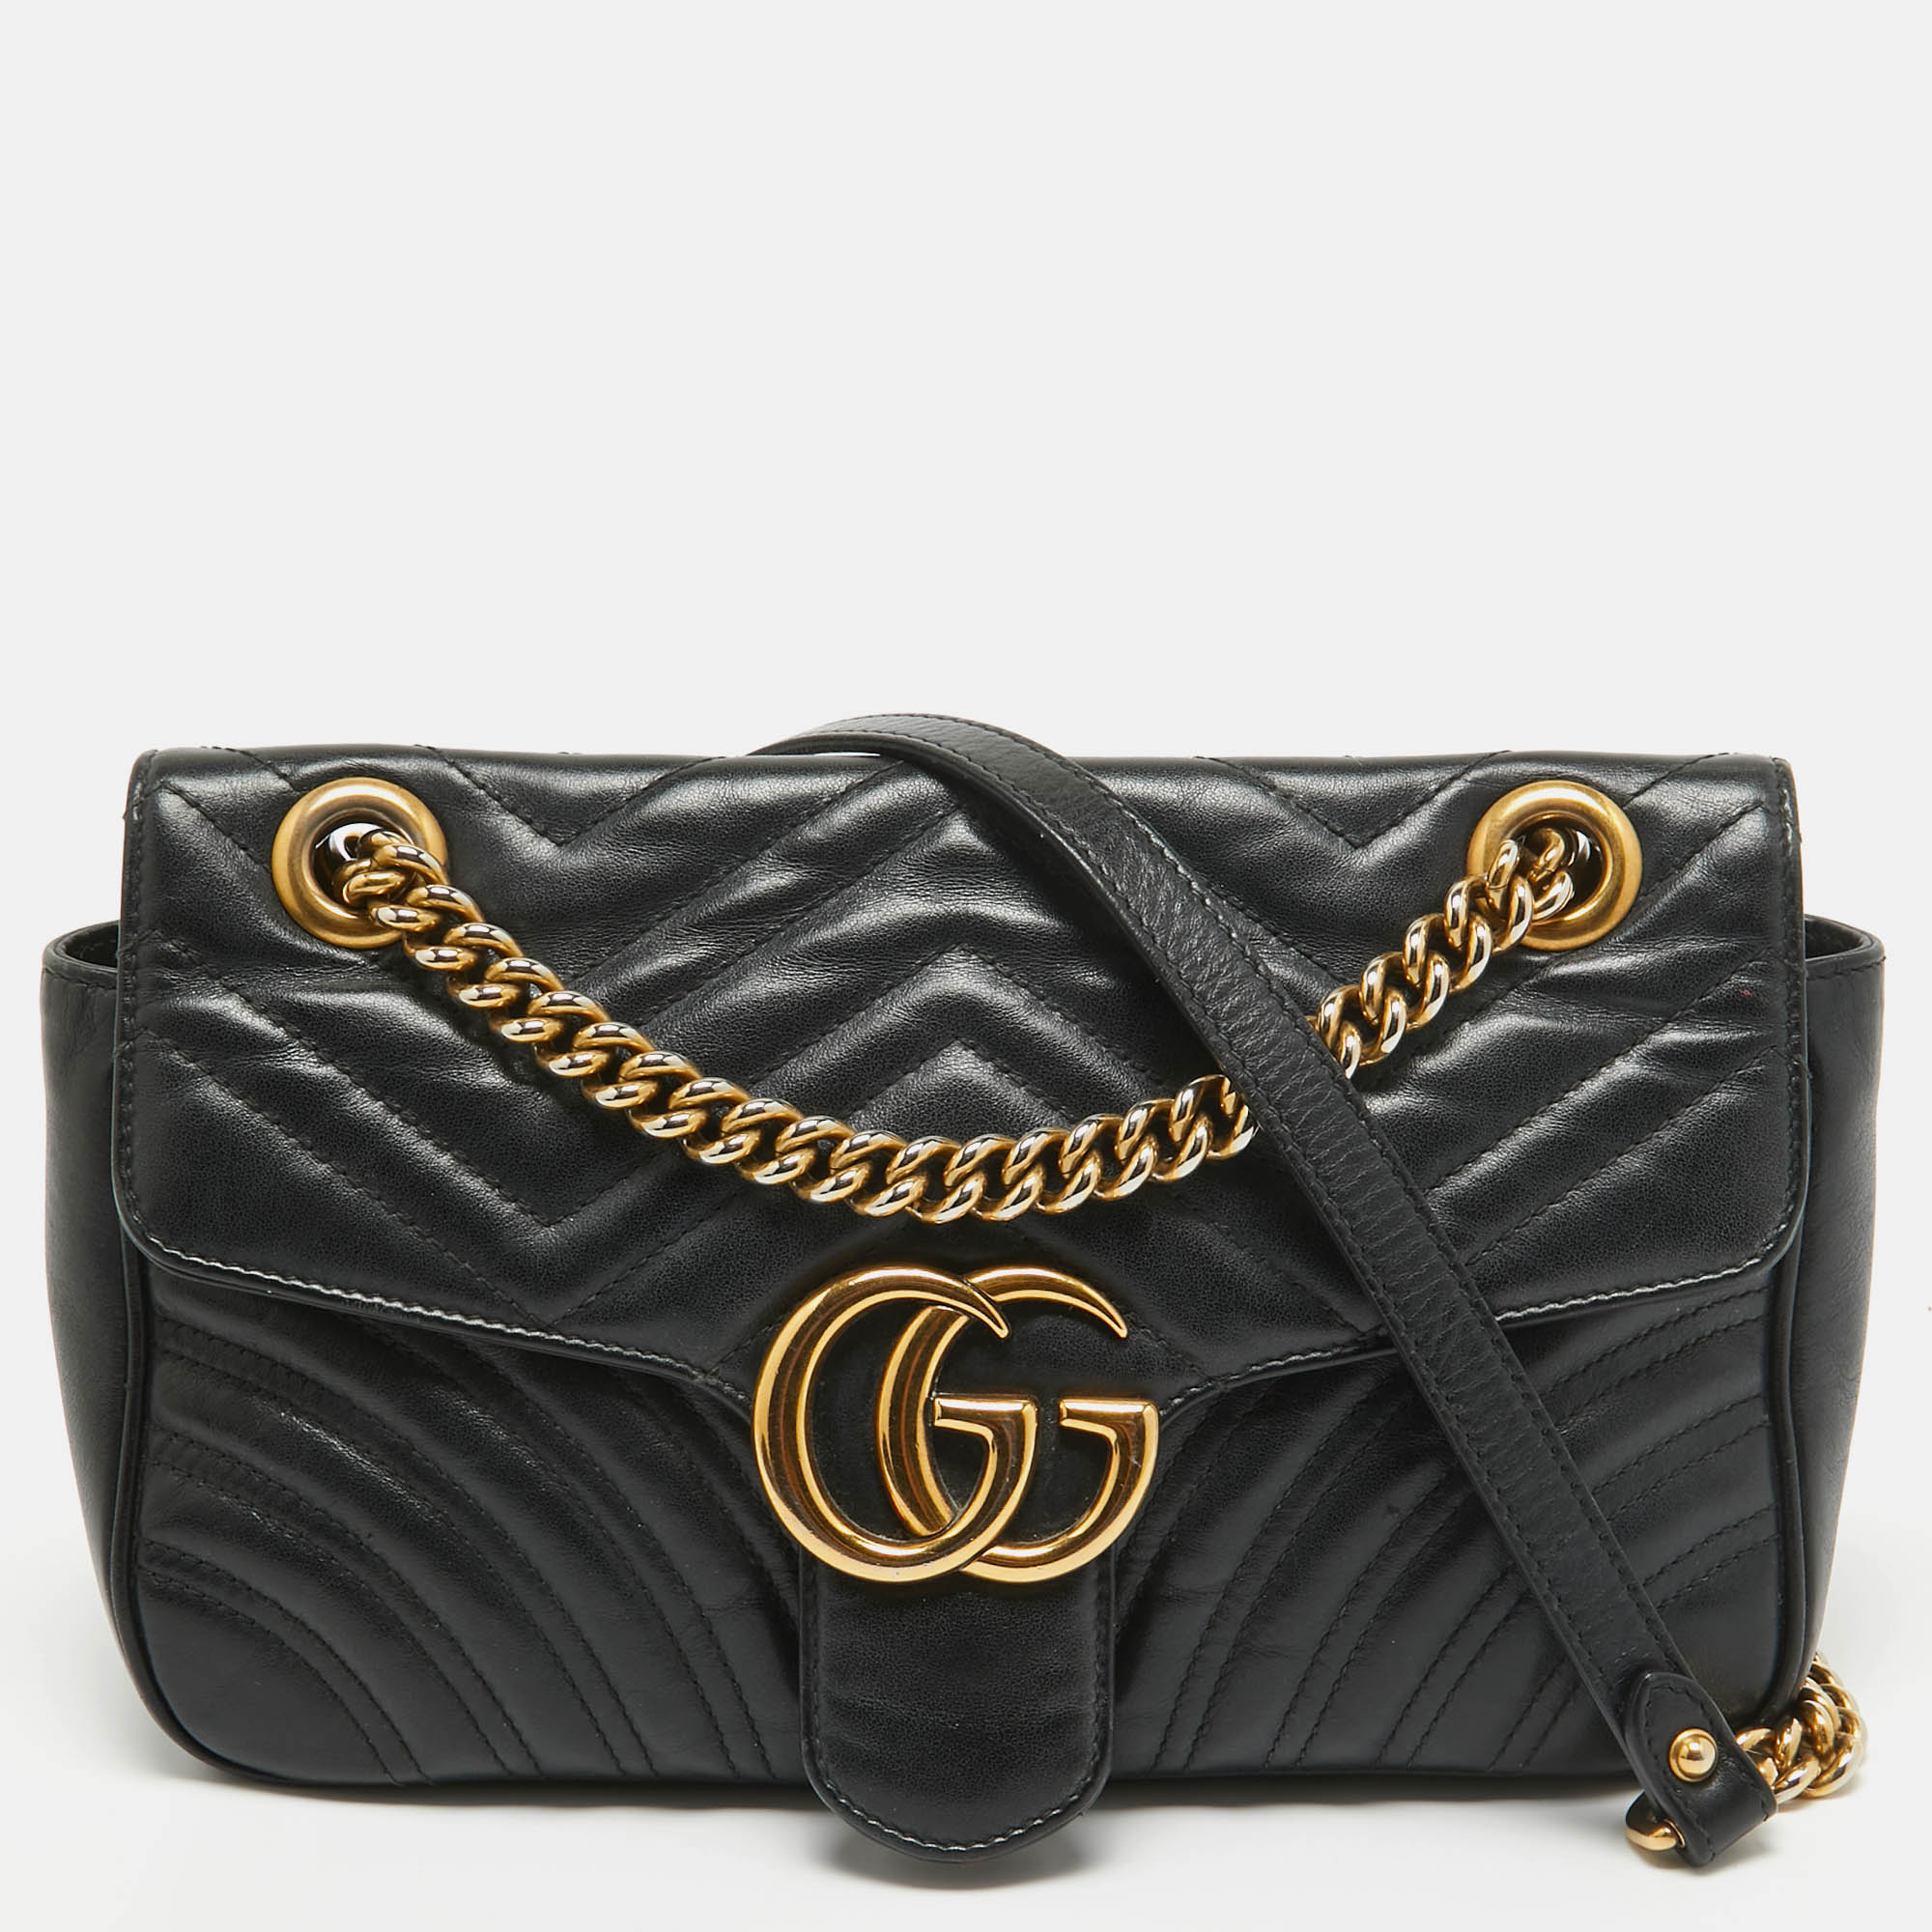 Innovative and sophisticated this Gucci Marmont bag evokes a sense of classic glamour. Finely crafted from matelassé leather it gets a luxe update with the interlocking GG motif on the front and features a well sized interior. The chain strap enables you to carry it in a stylish way and the gold tone accents make it undeniably chic.